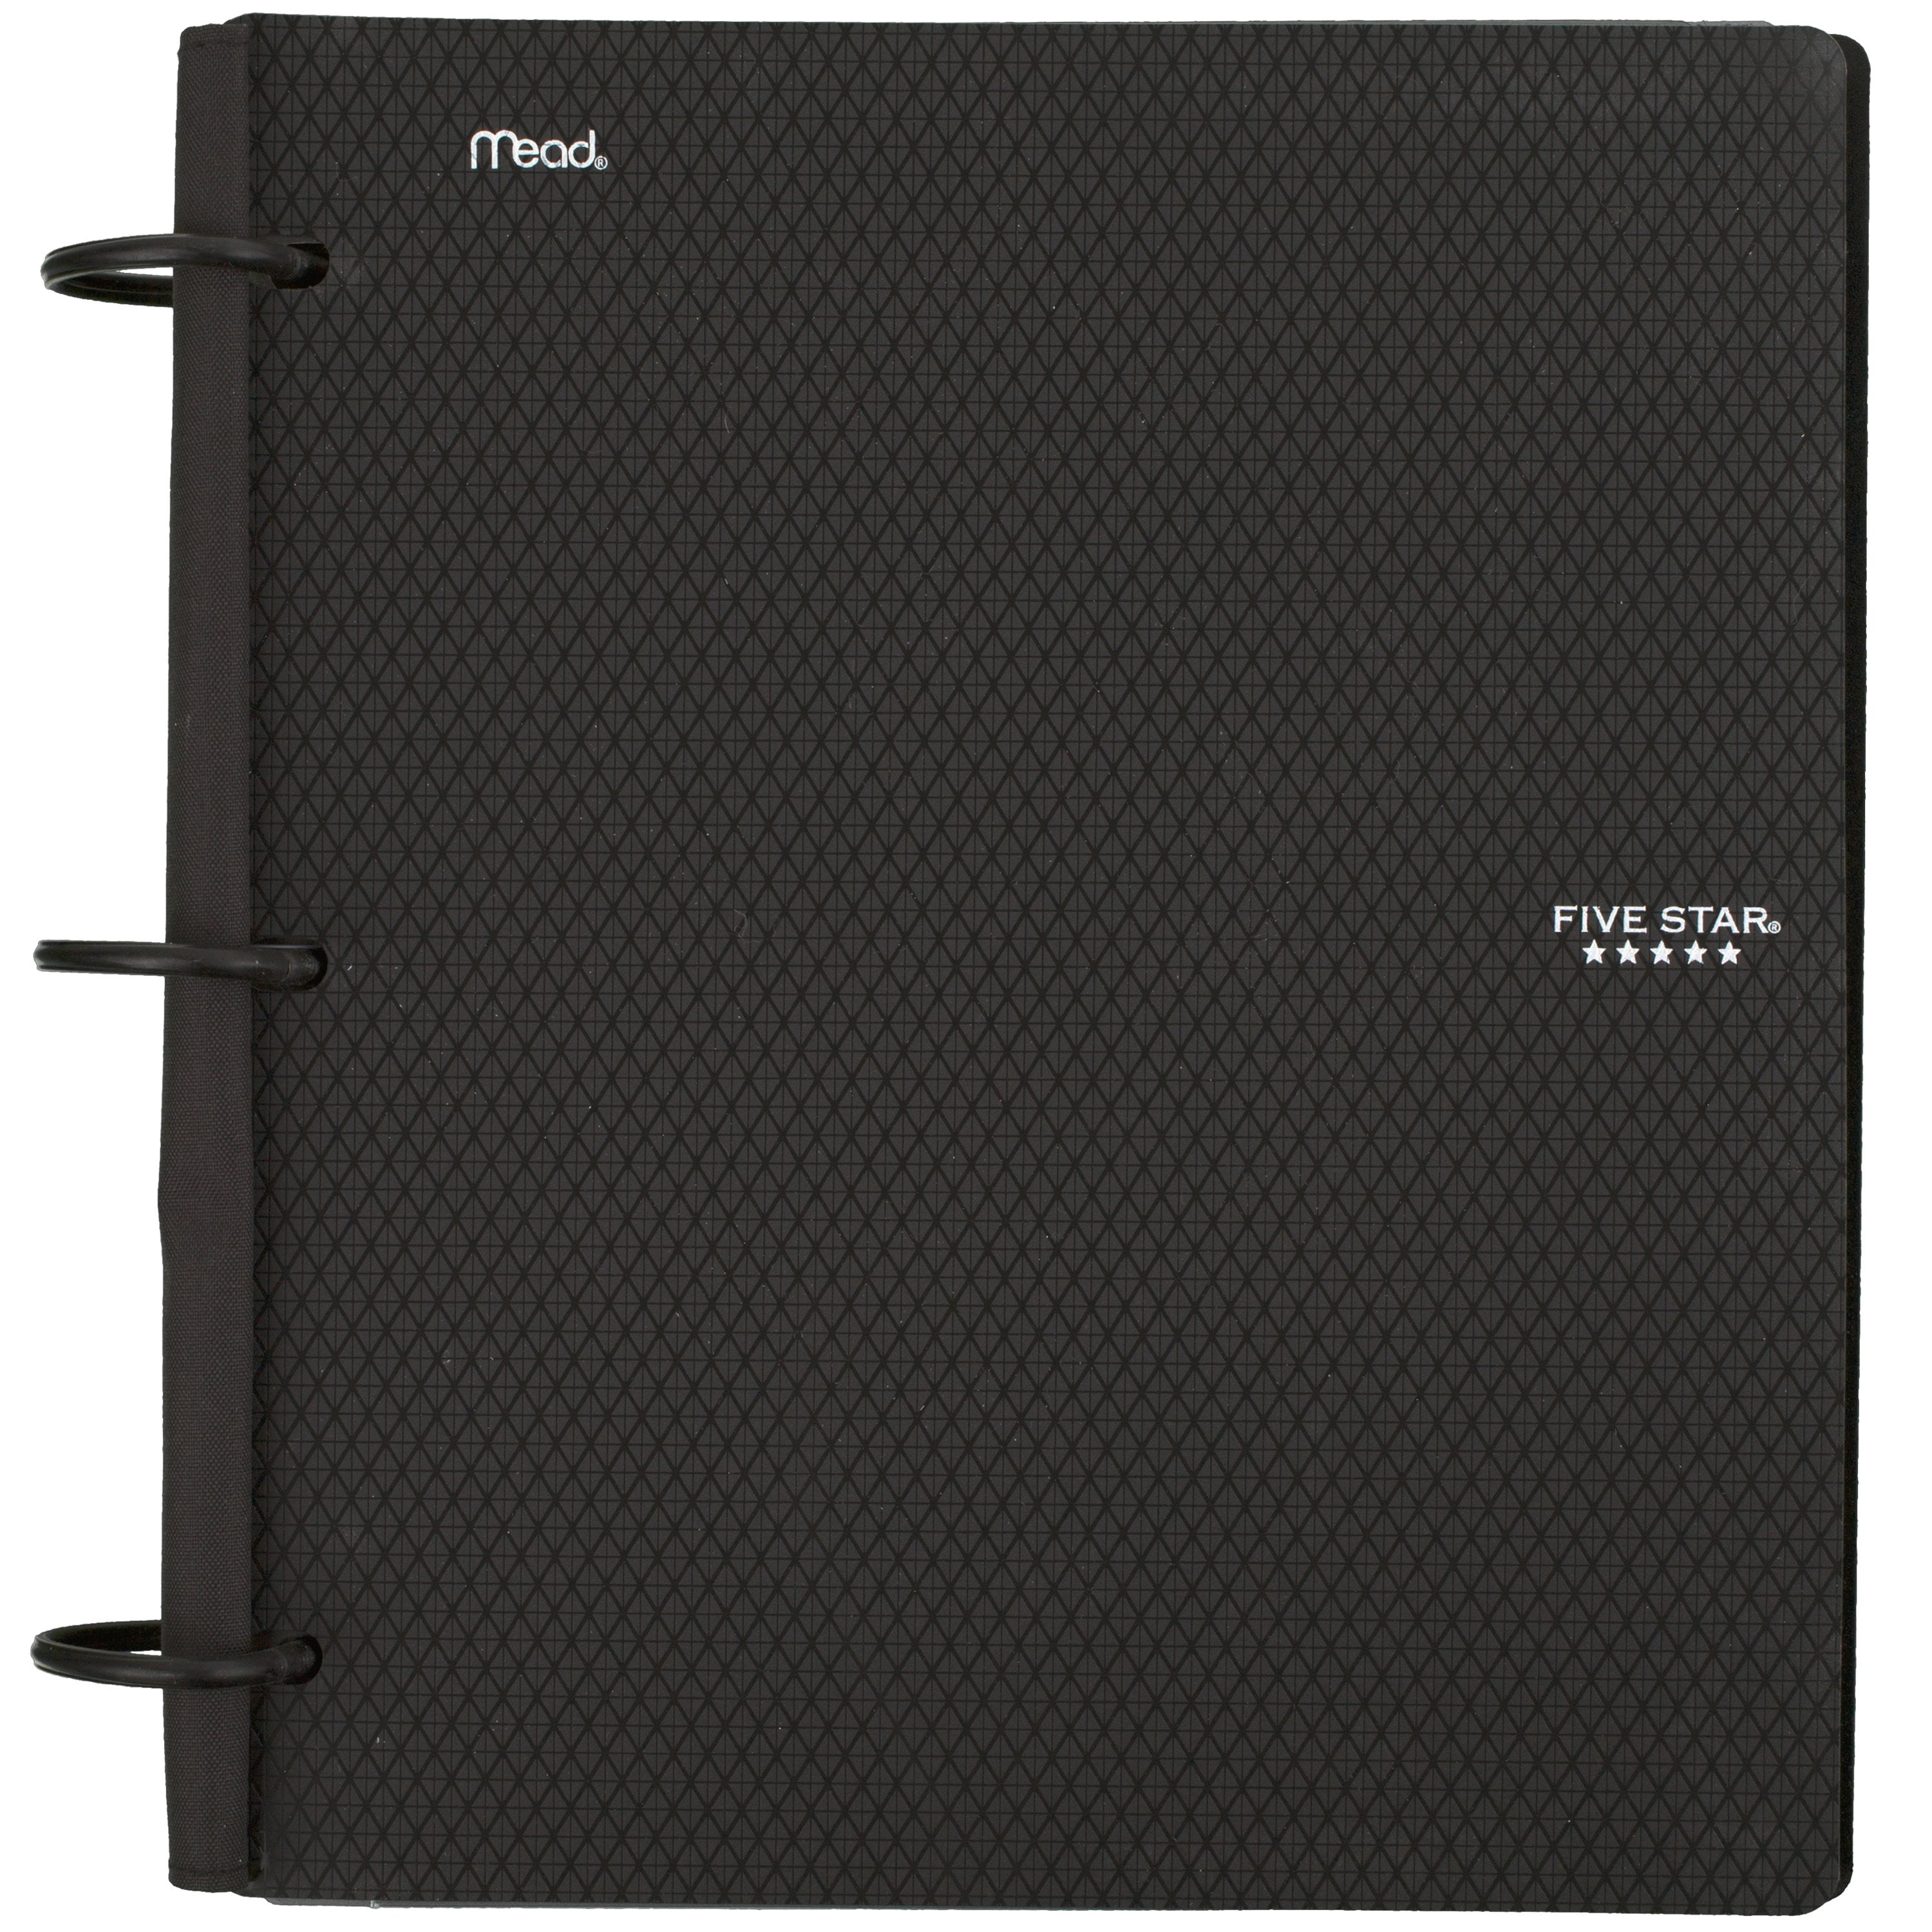 Black Five Star Flex Hybrid NoteBinder - 2 Pack 72009 Notebook and 3 Ring Binder All-in-One 1 Inch Binder with Tabs 